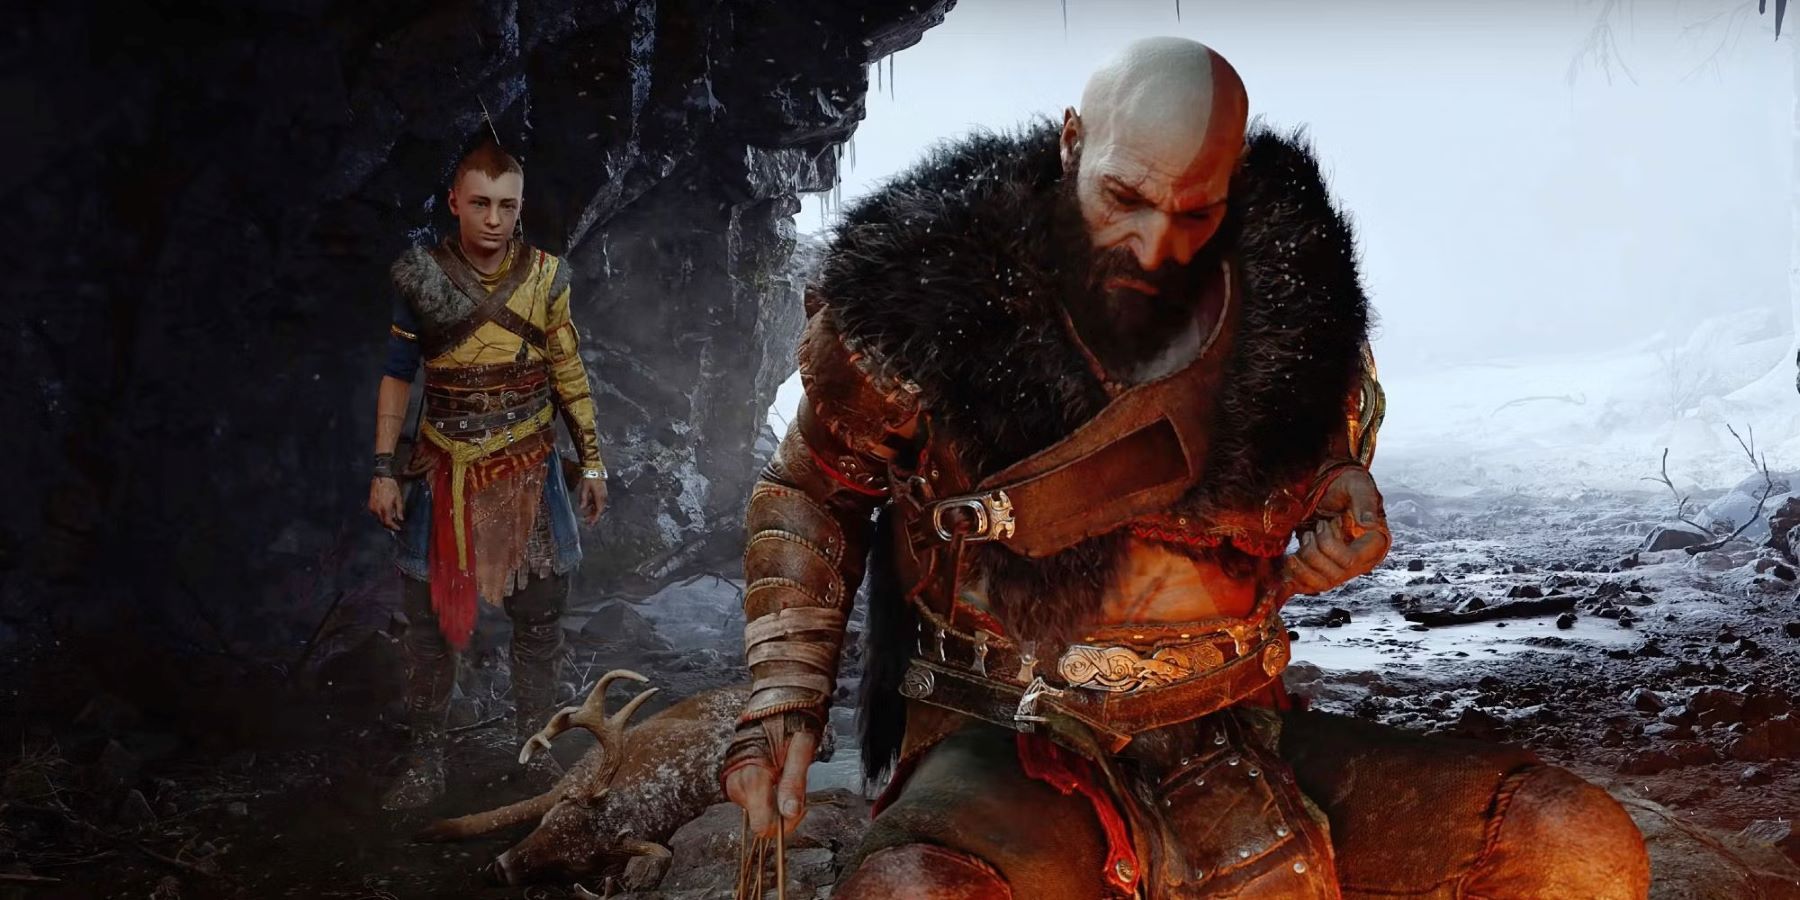 Kratos and Atreus camping in a cave in God of War Ragnarok